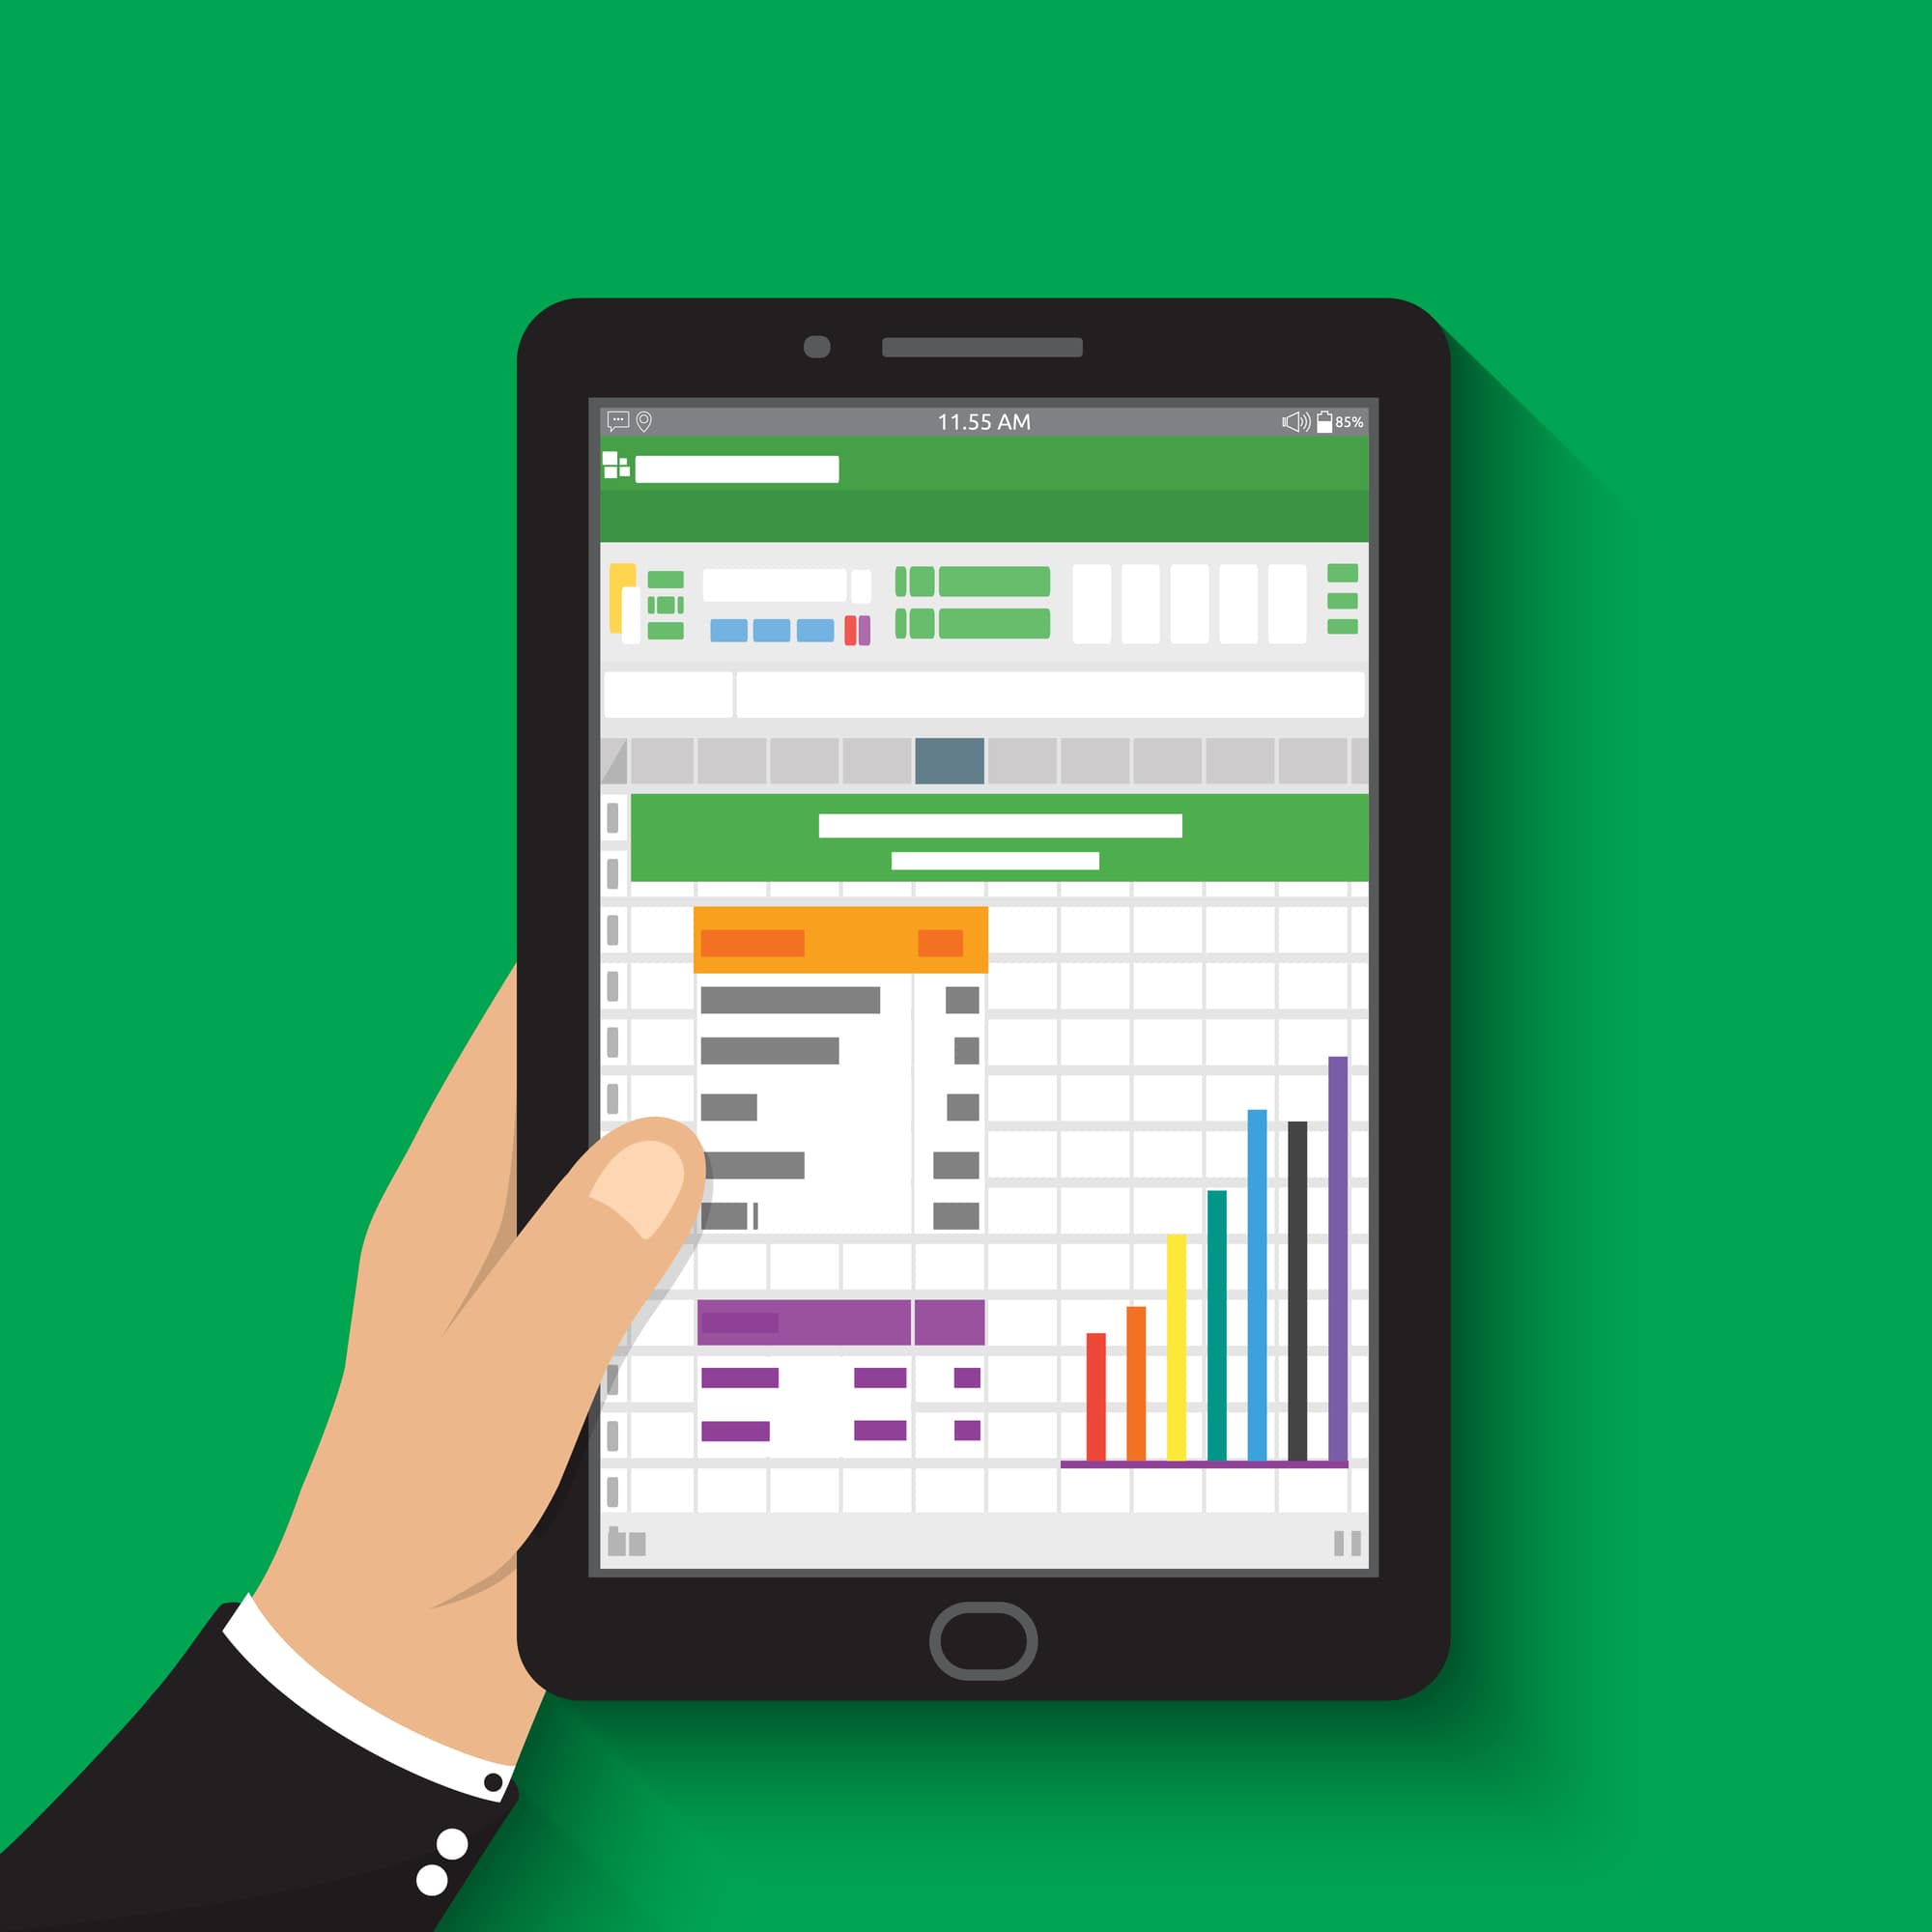 vector image of business person's hand holding a tablet showing an Excel spreadsheet